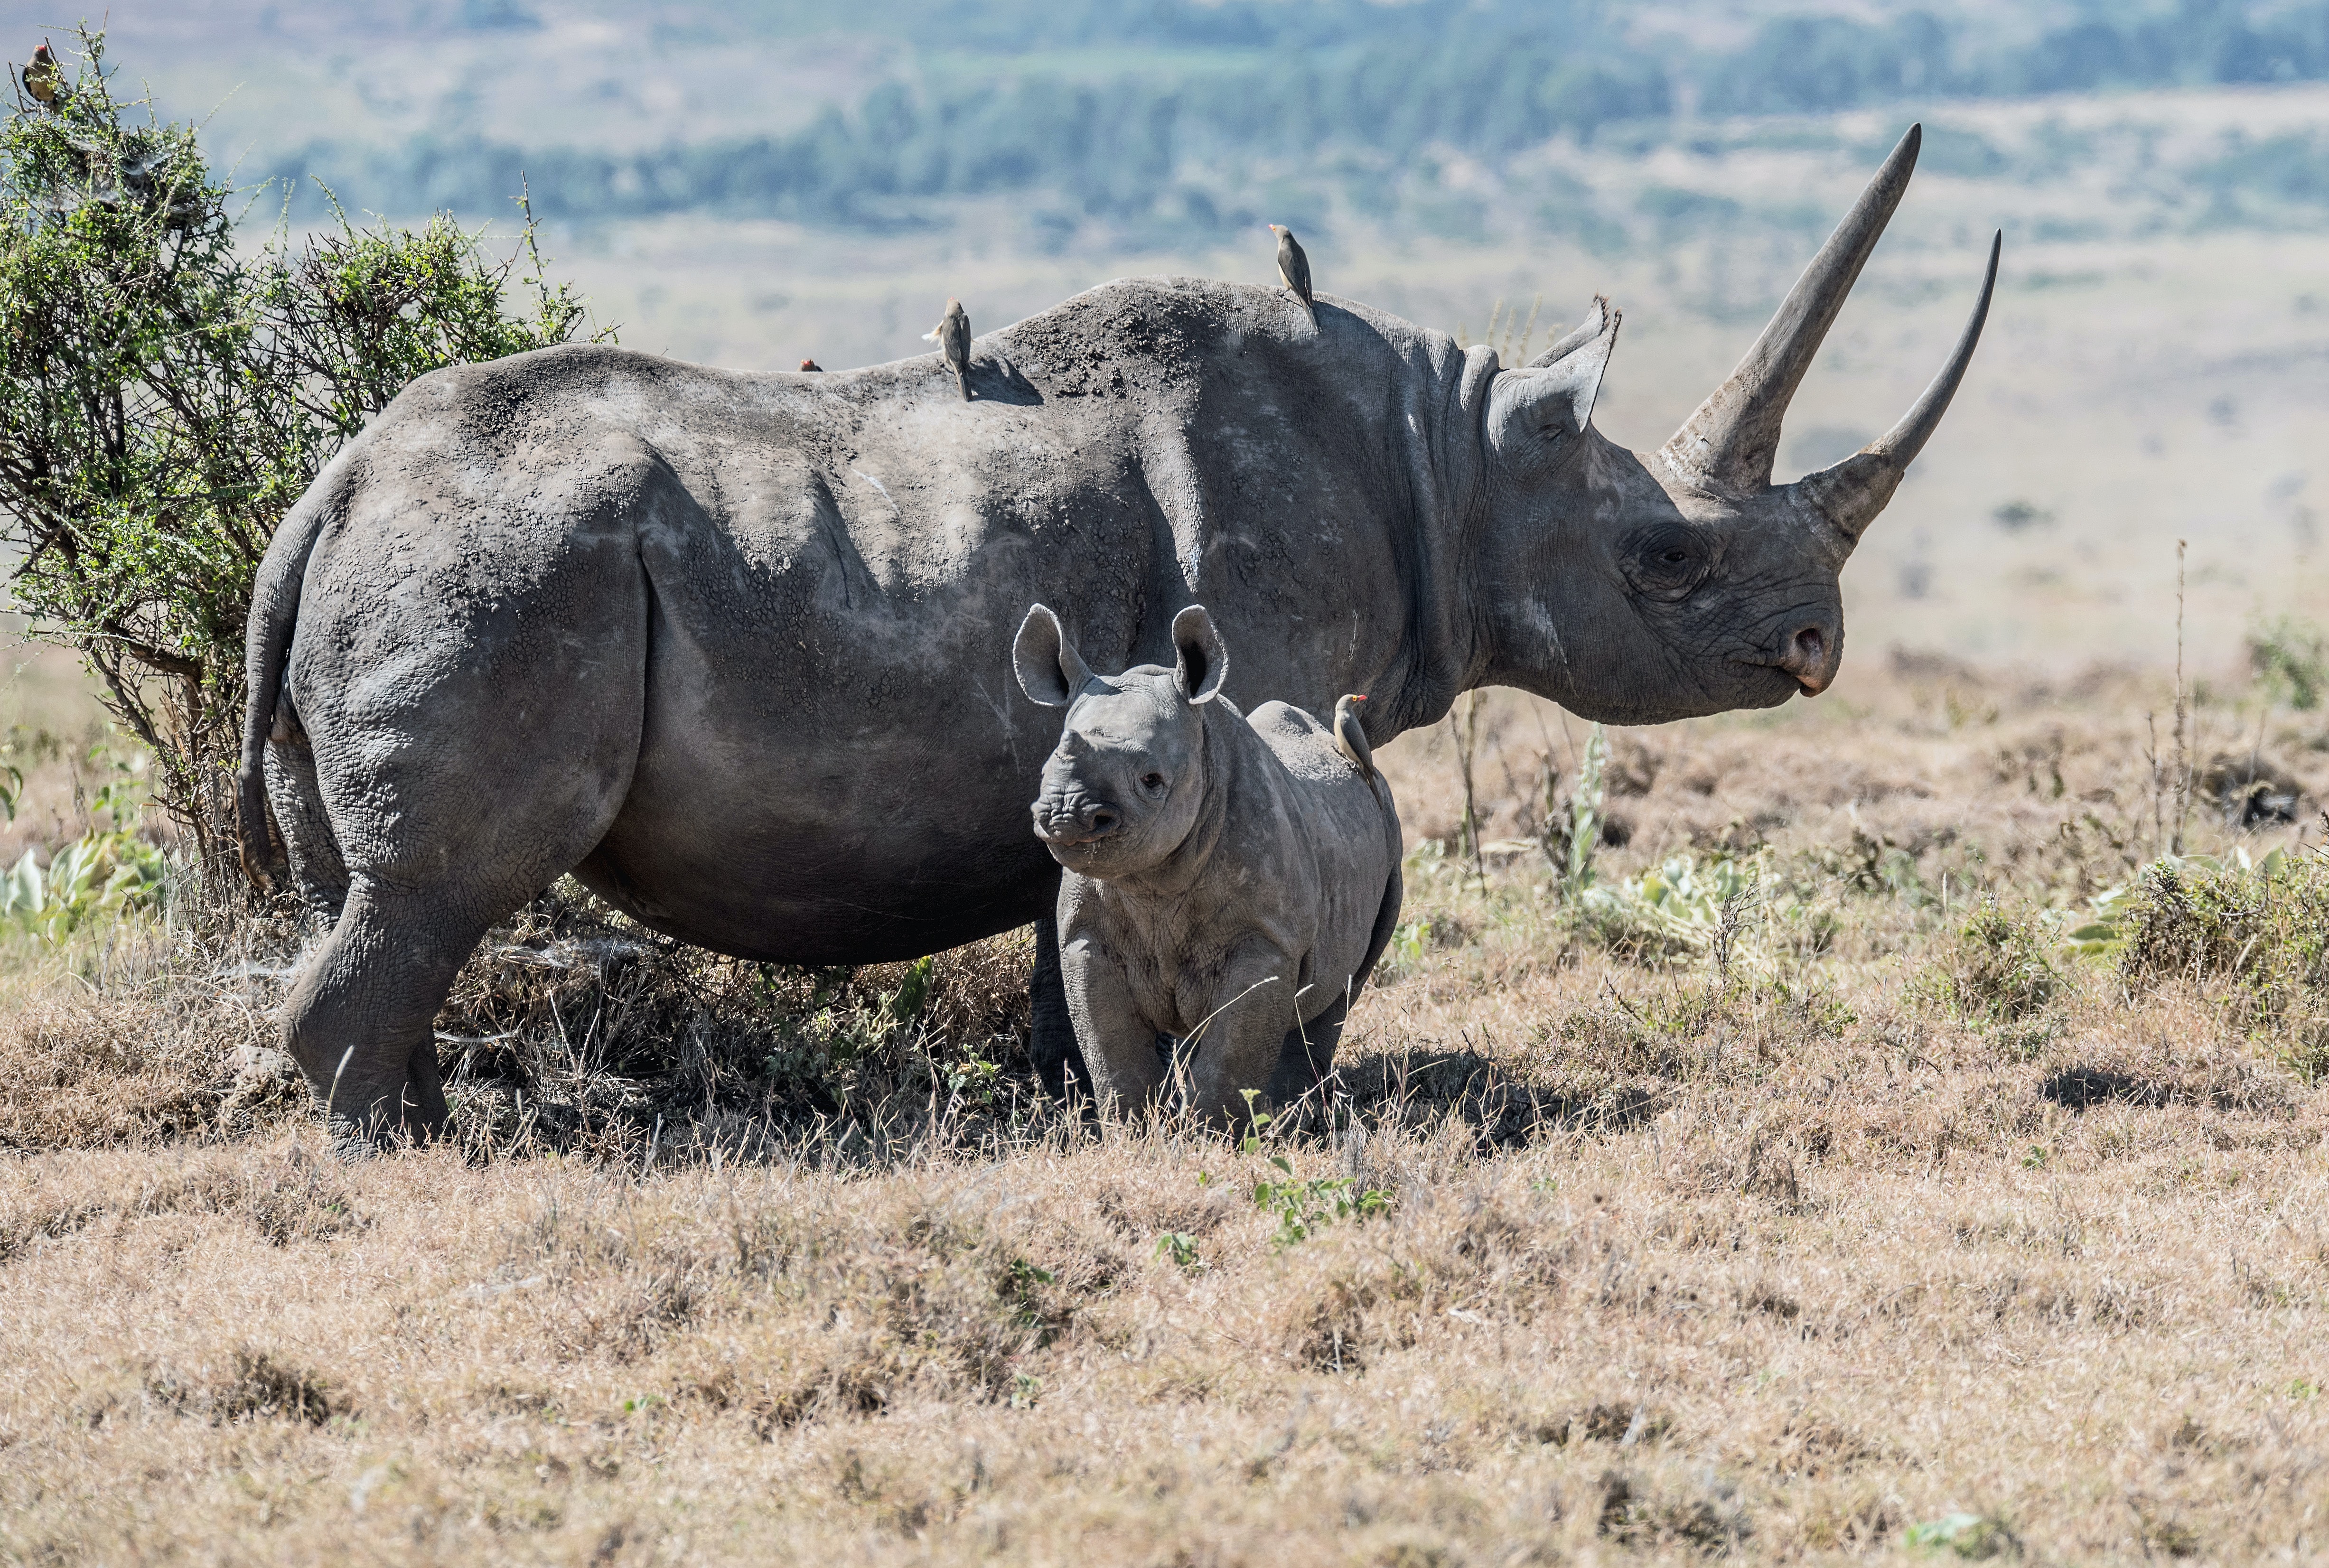 Hang tight, rhino: airlifting endangered creatures safer than expected |  Cornell University College of Veterinary Medicine